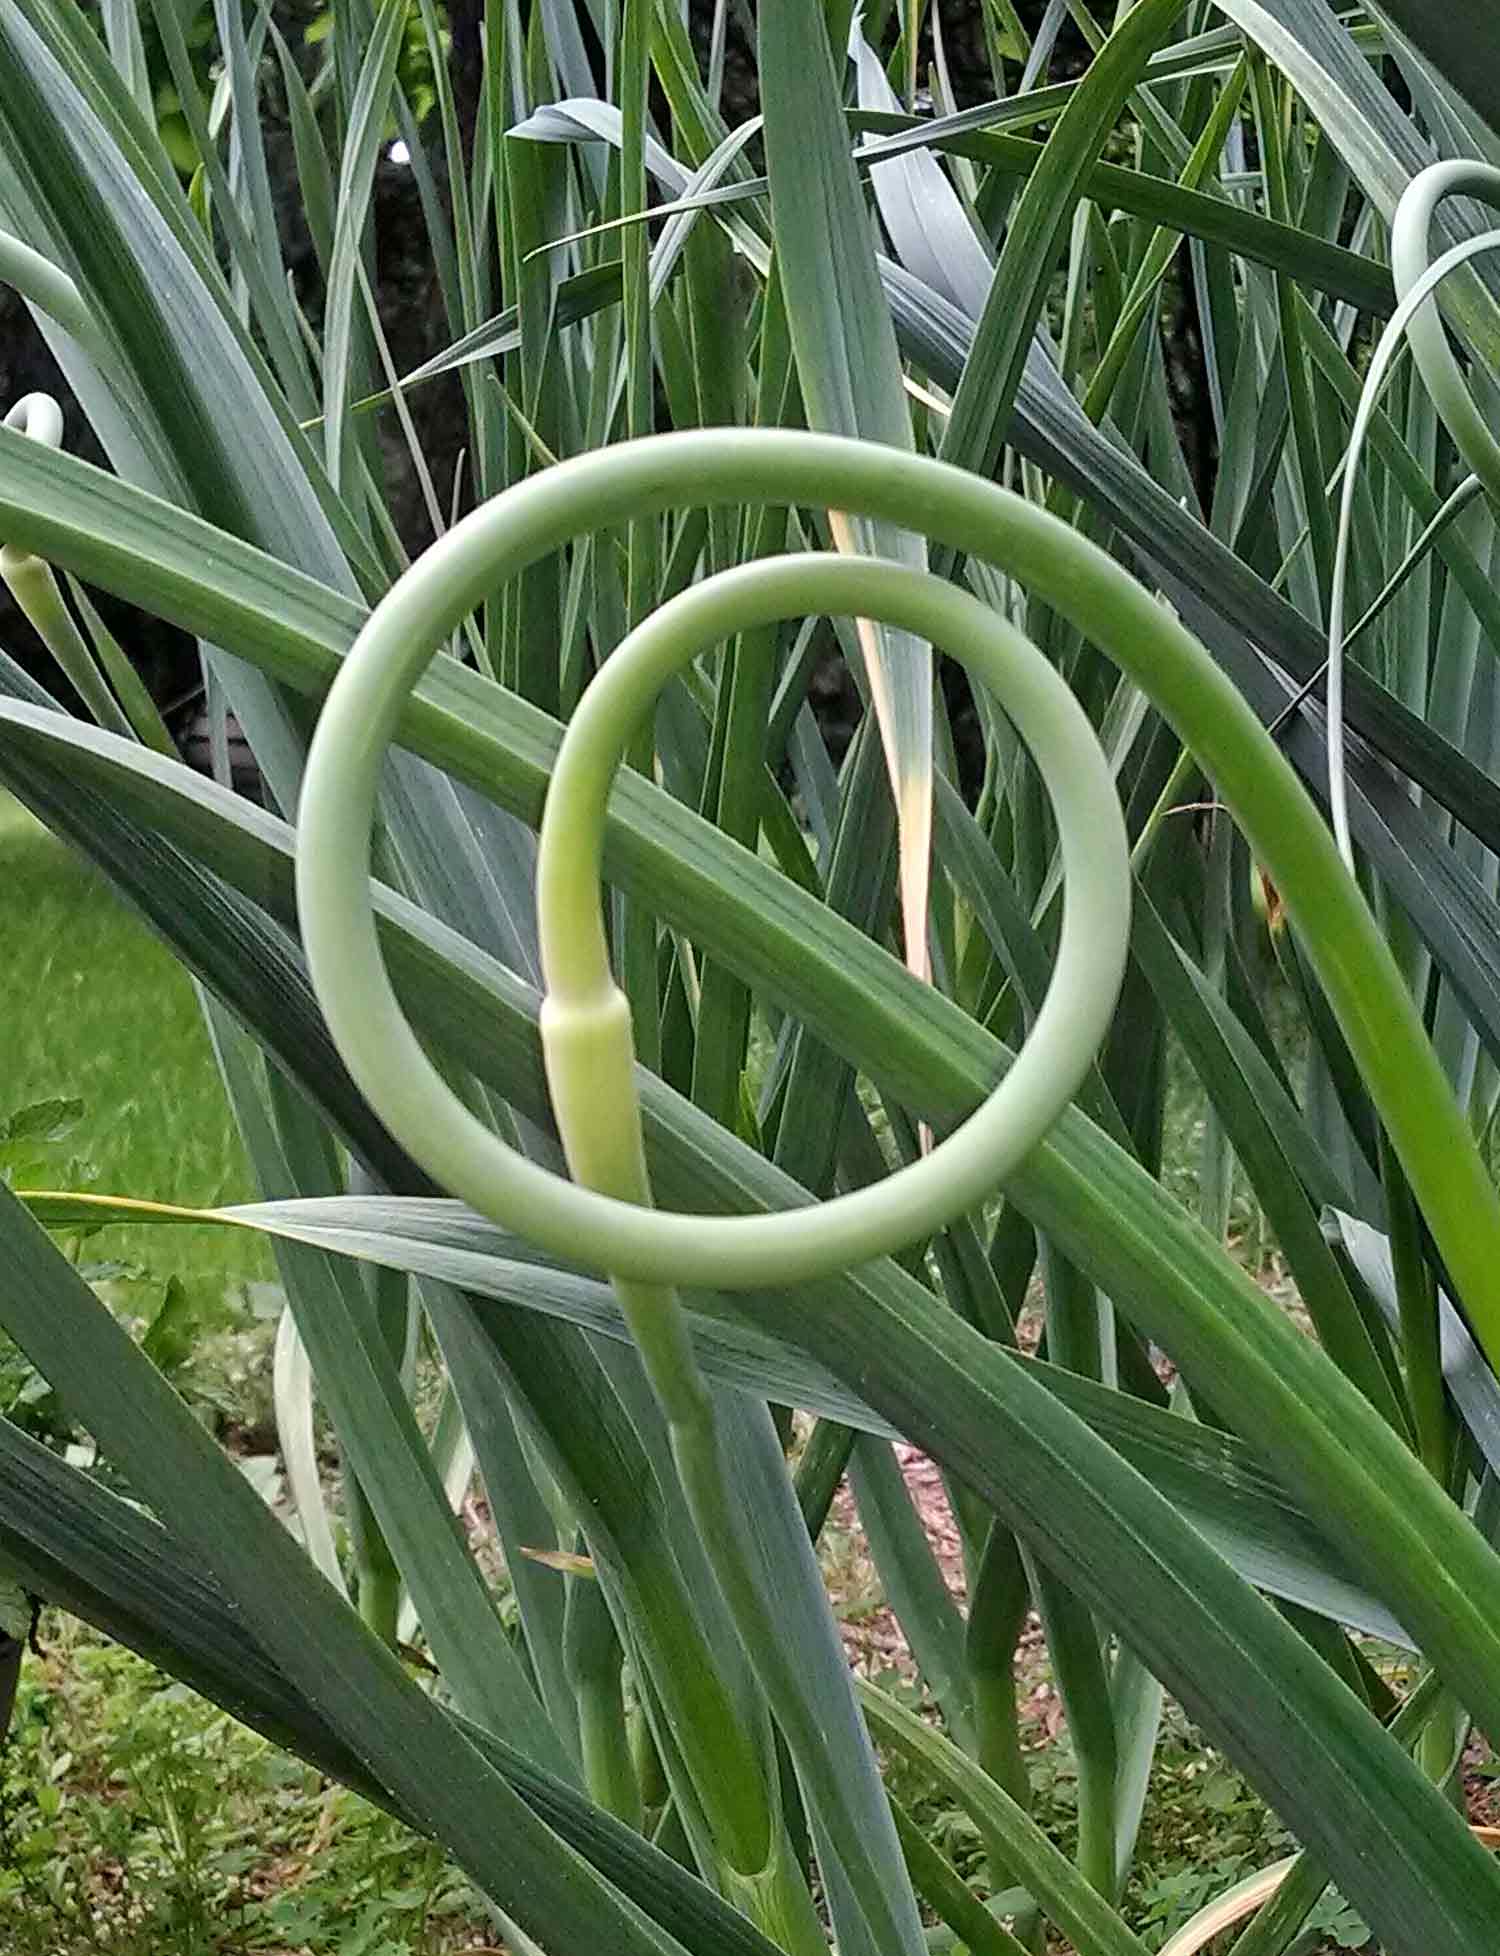 A curly garlic scape in the garlic bed.